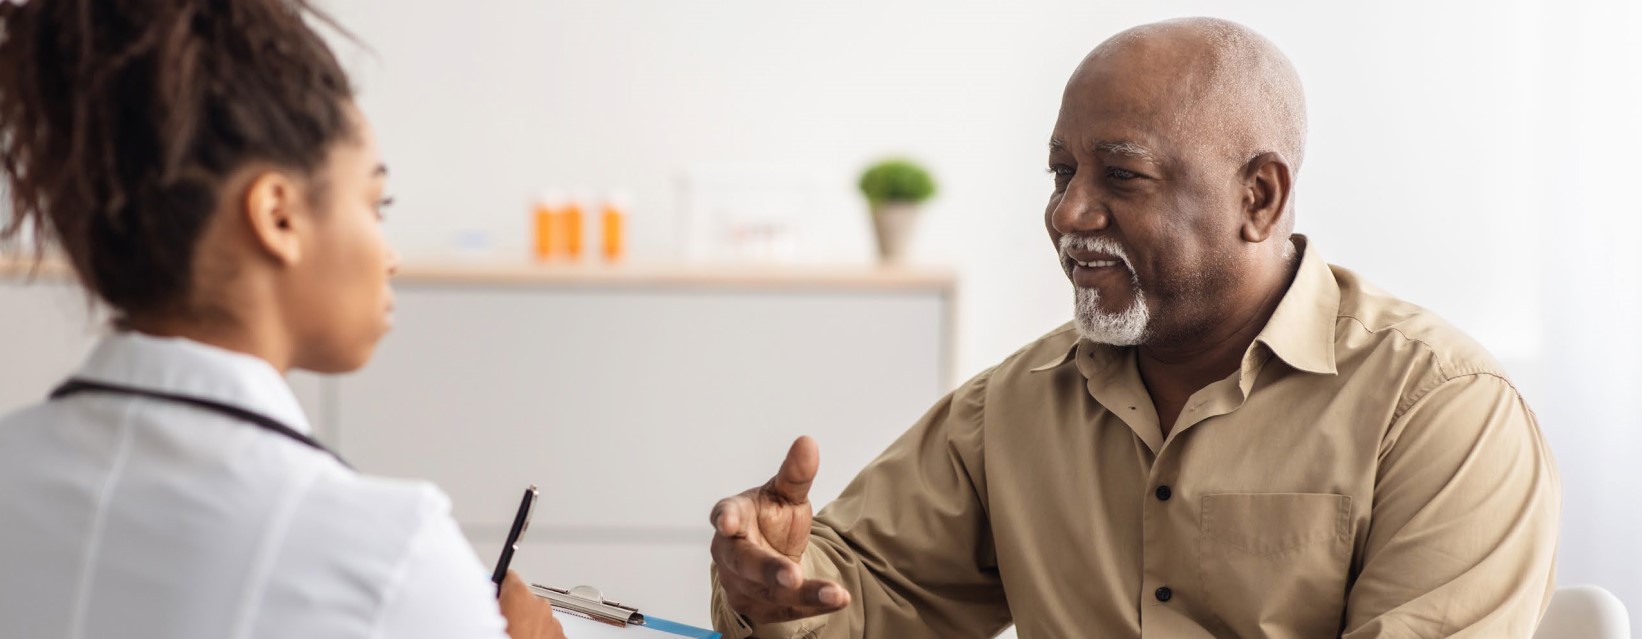 Patient talking with doctor